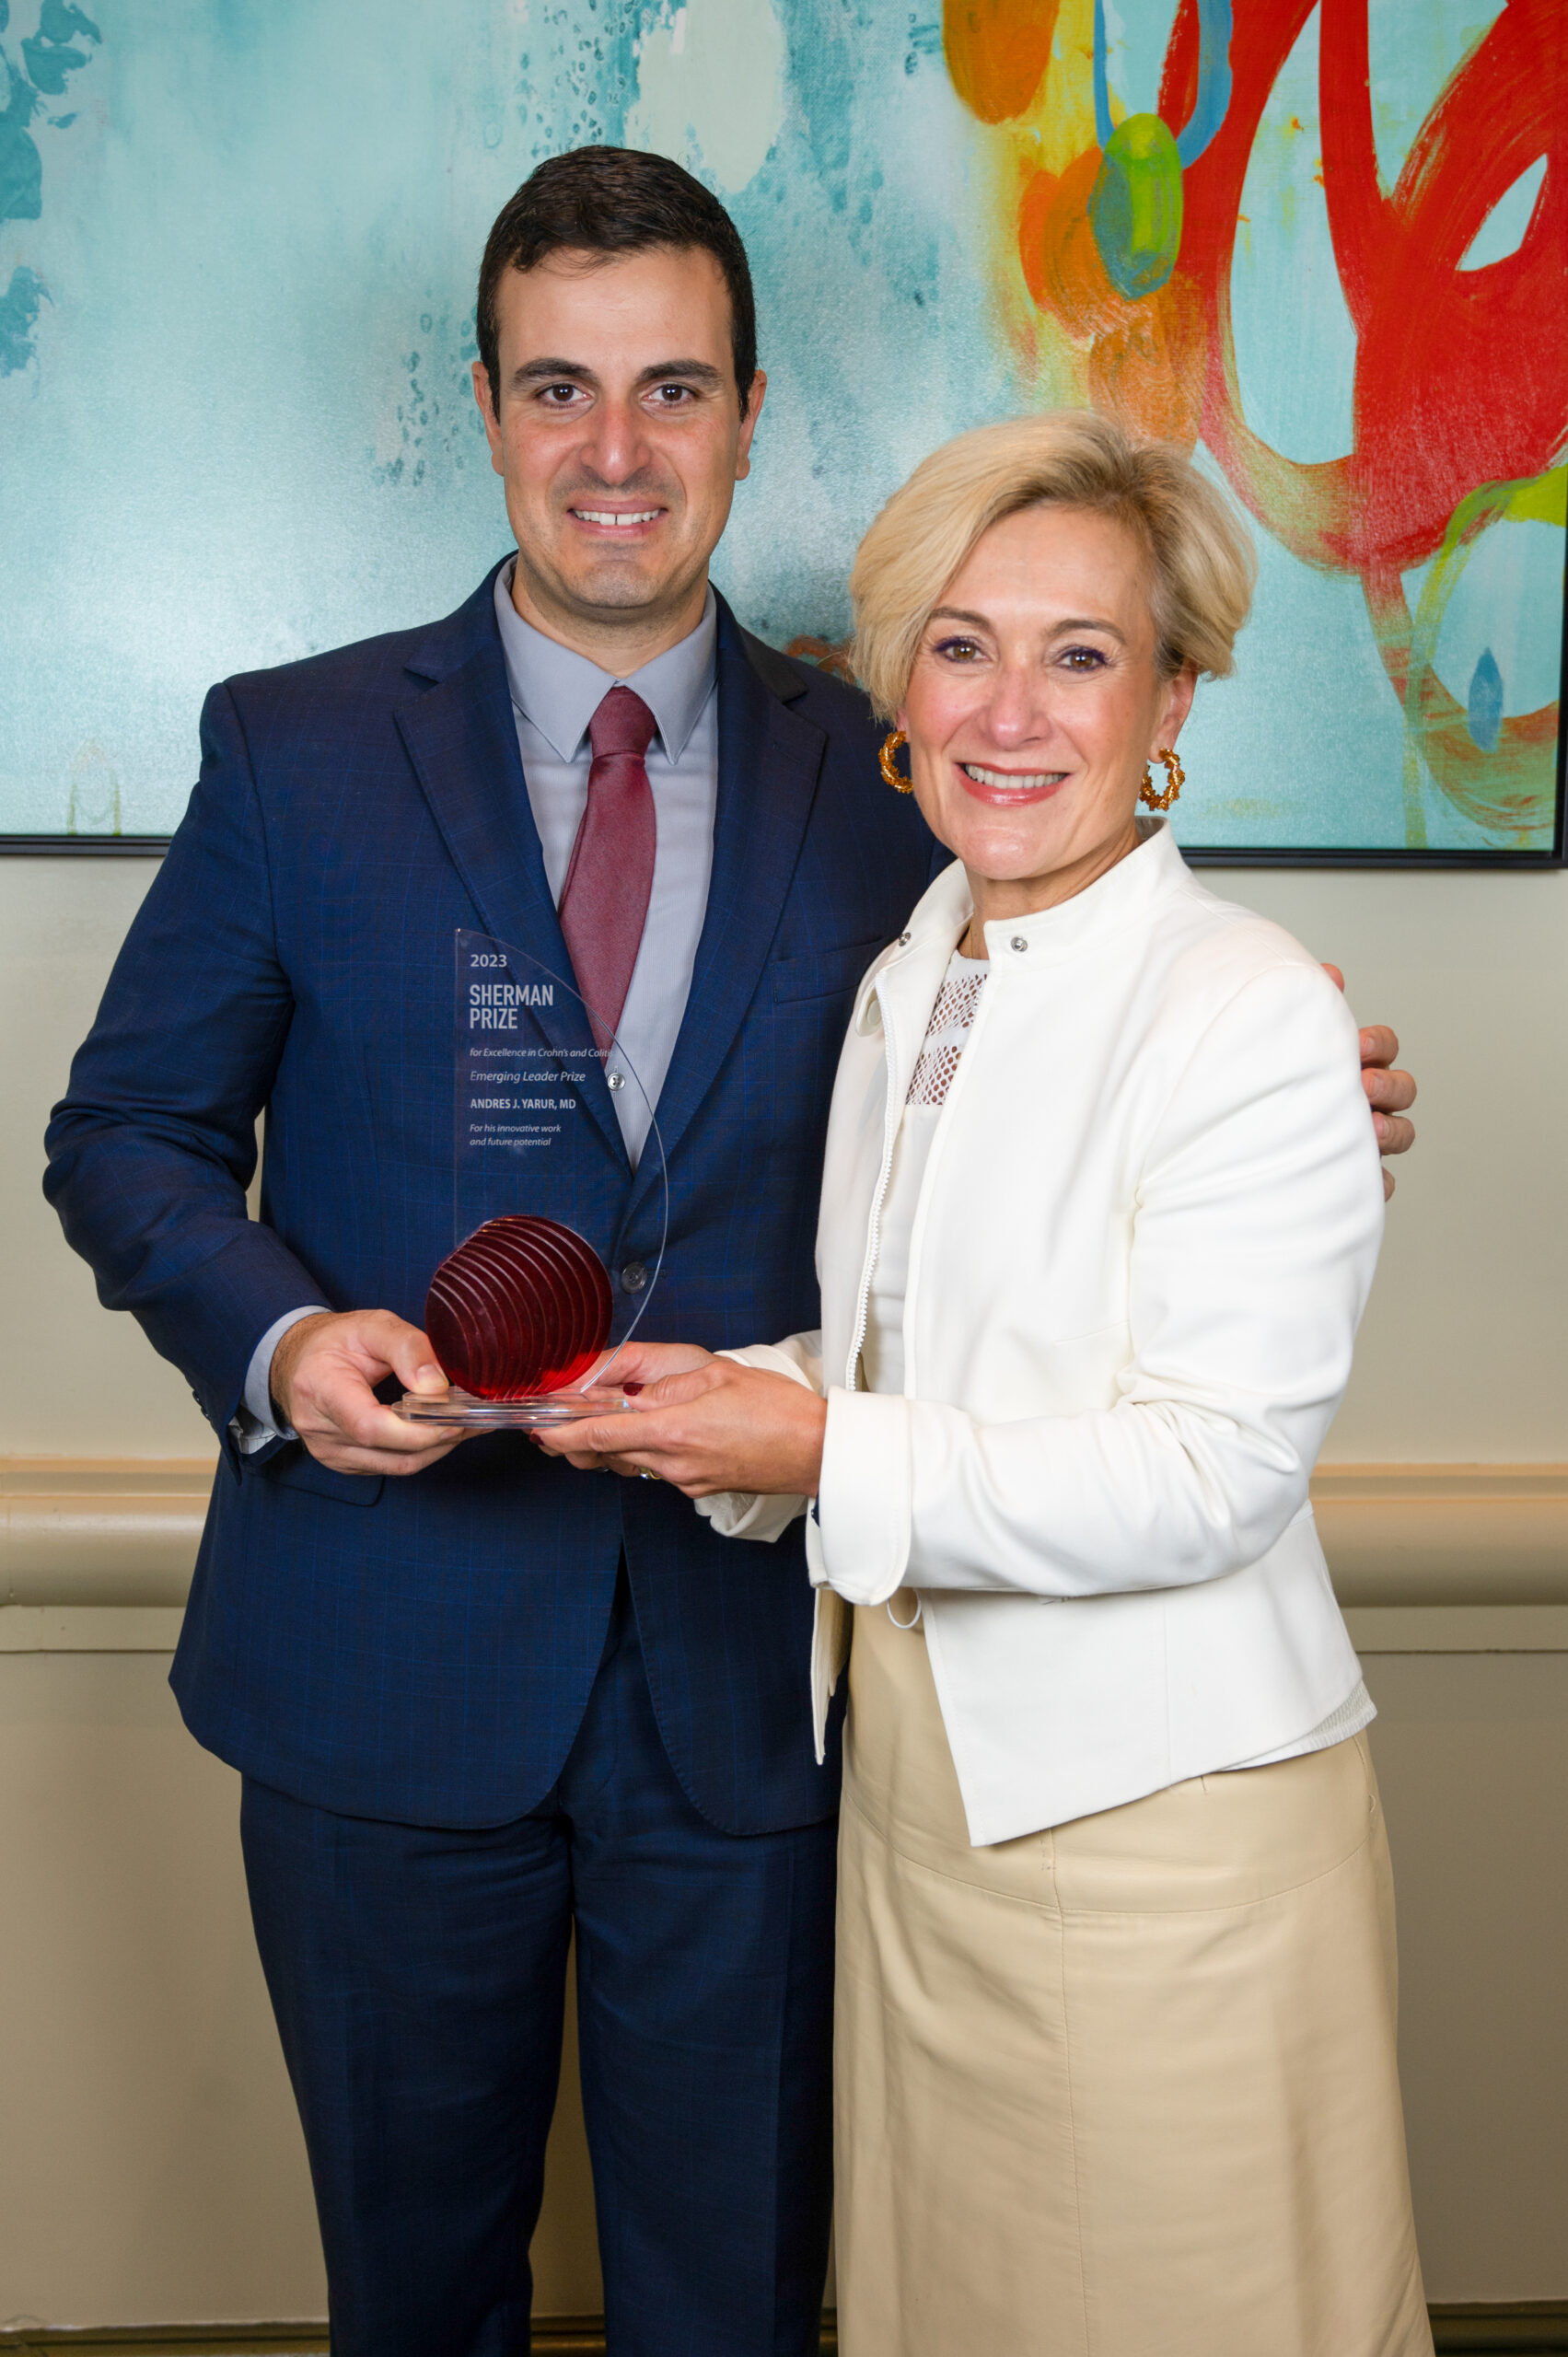 <p>2023 Selection Committee Chair Maria T. Abreu, MD and 2023 Sherman Emerging Leader Prize Recipient Andres J. Yarur, MD</p>
